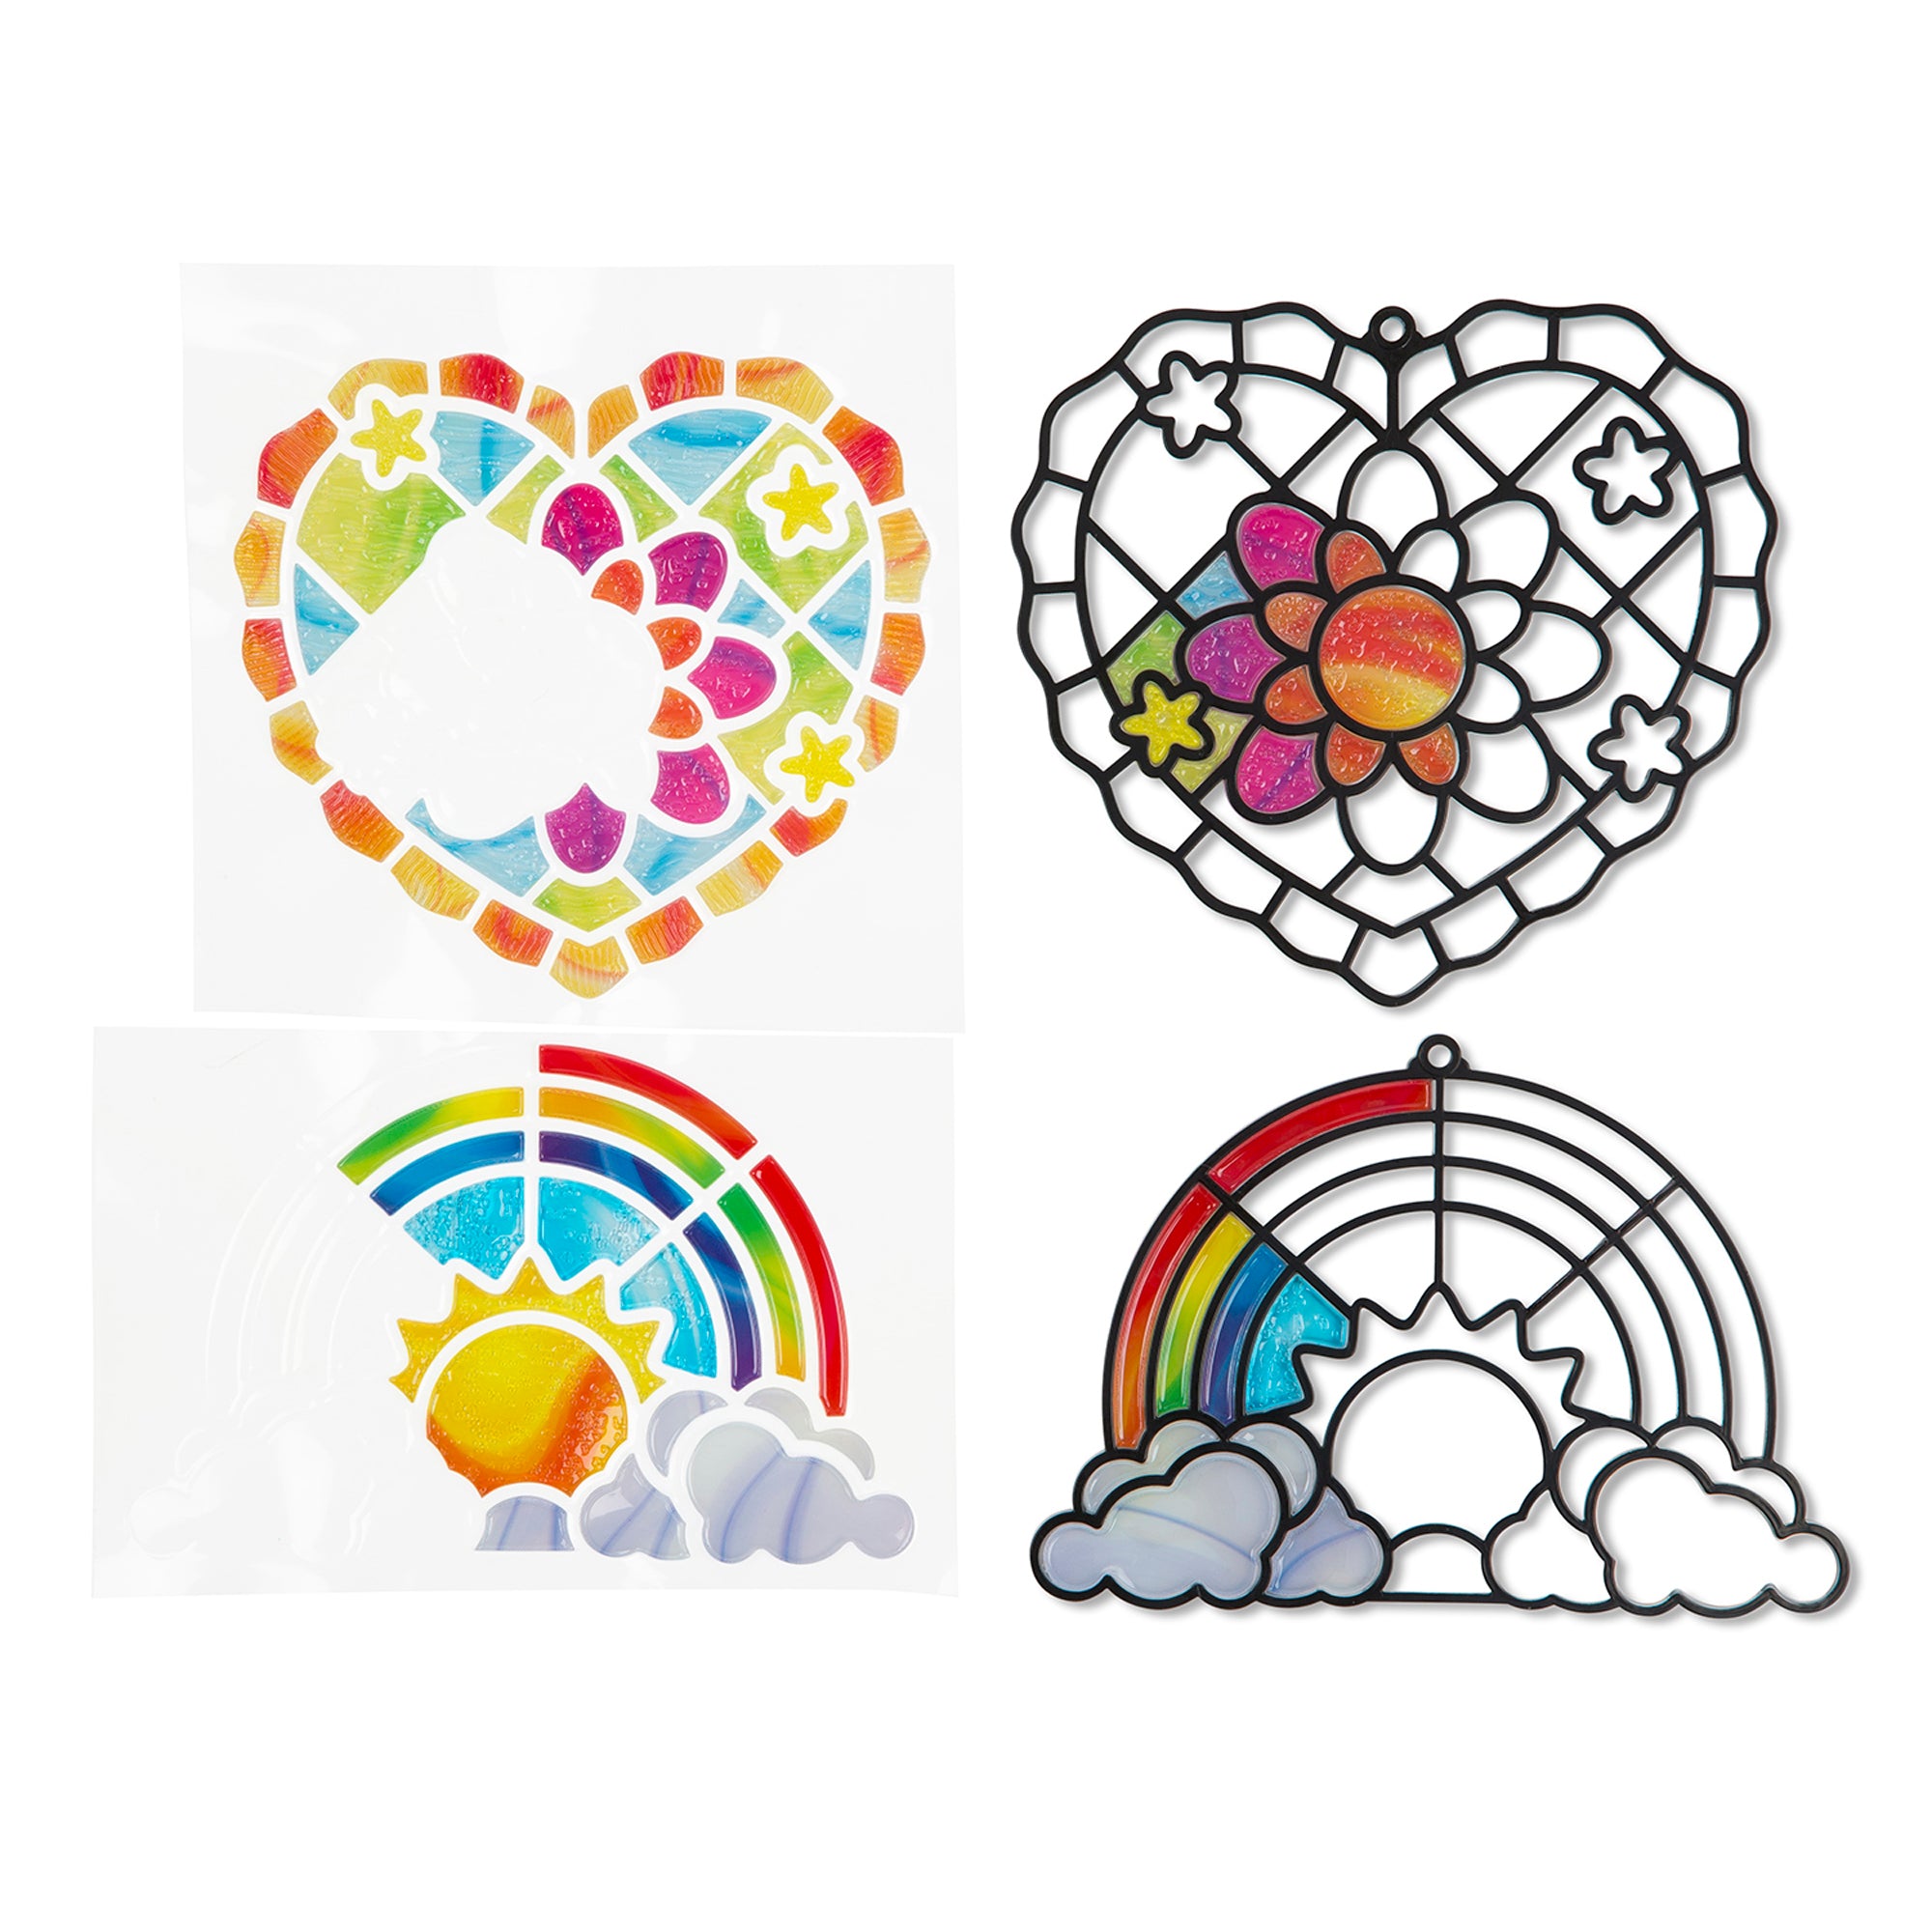 Melissa and Doug Stained Glass Made Easy - Rainbow & Hearts Ornaments